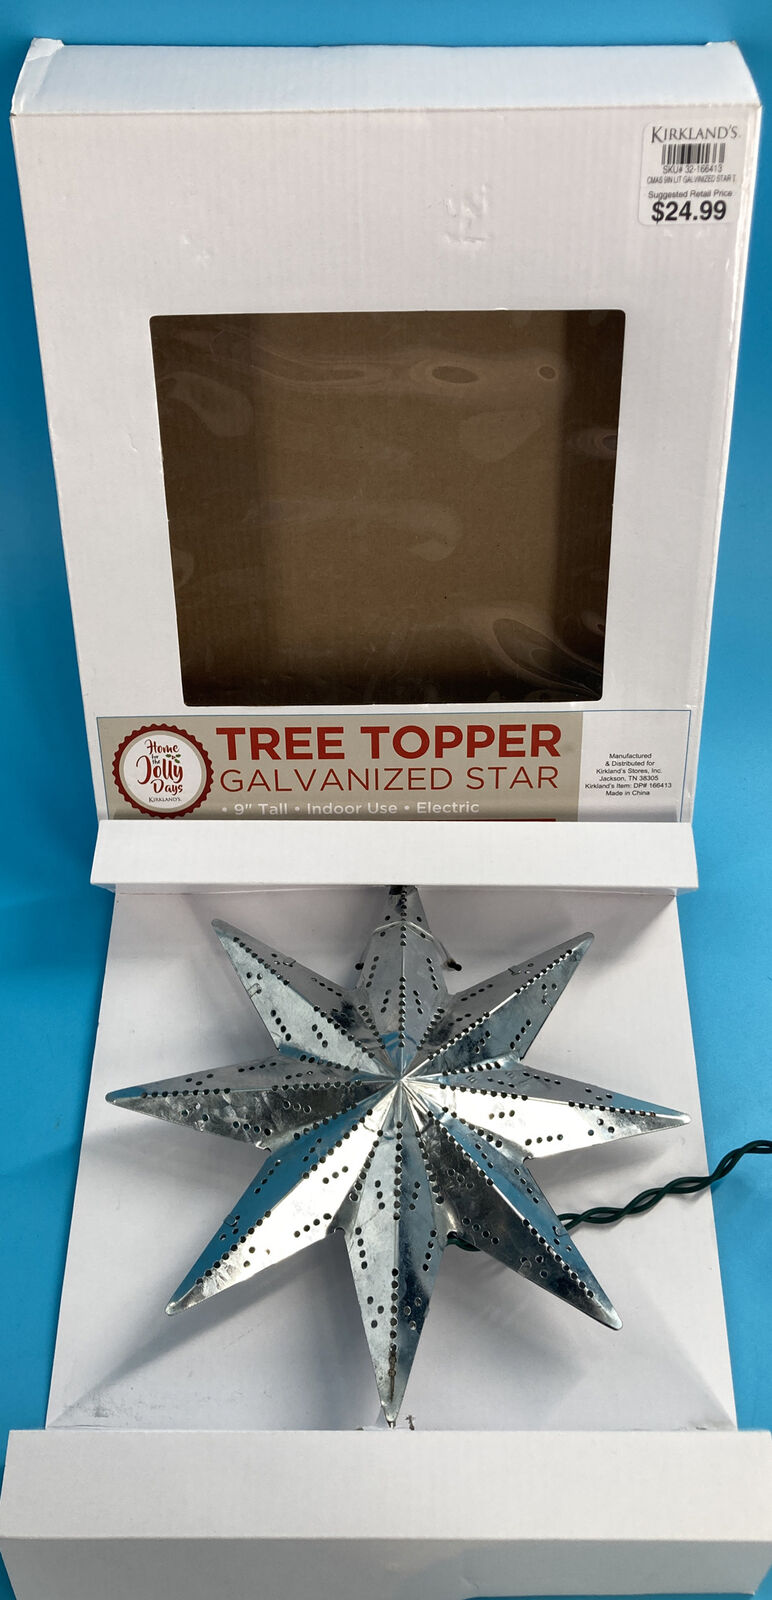 Kirklands Galvanized Metal 9” Star Tree Topper GREAT CONDITION Replacement Bulb